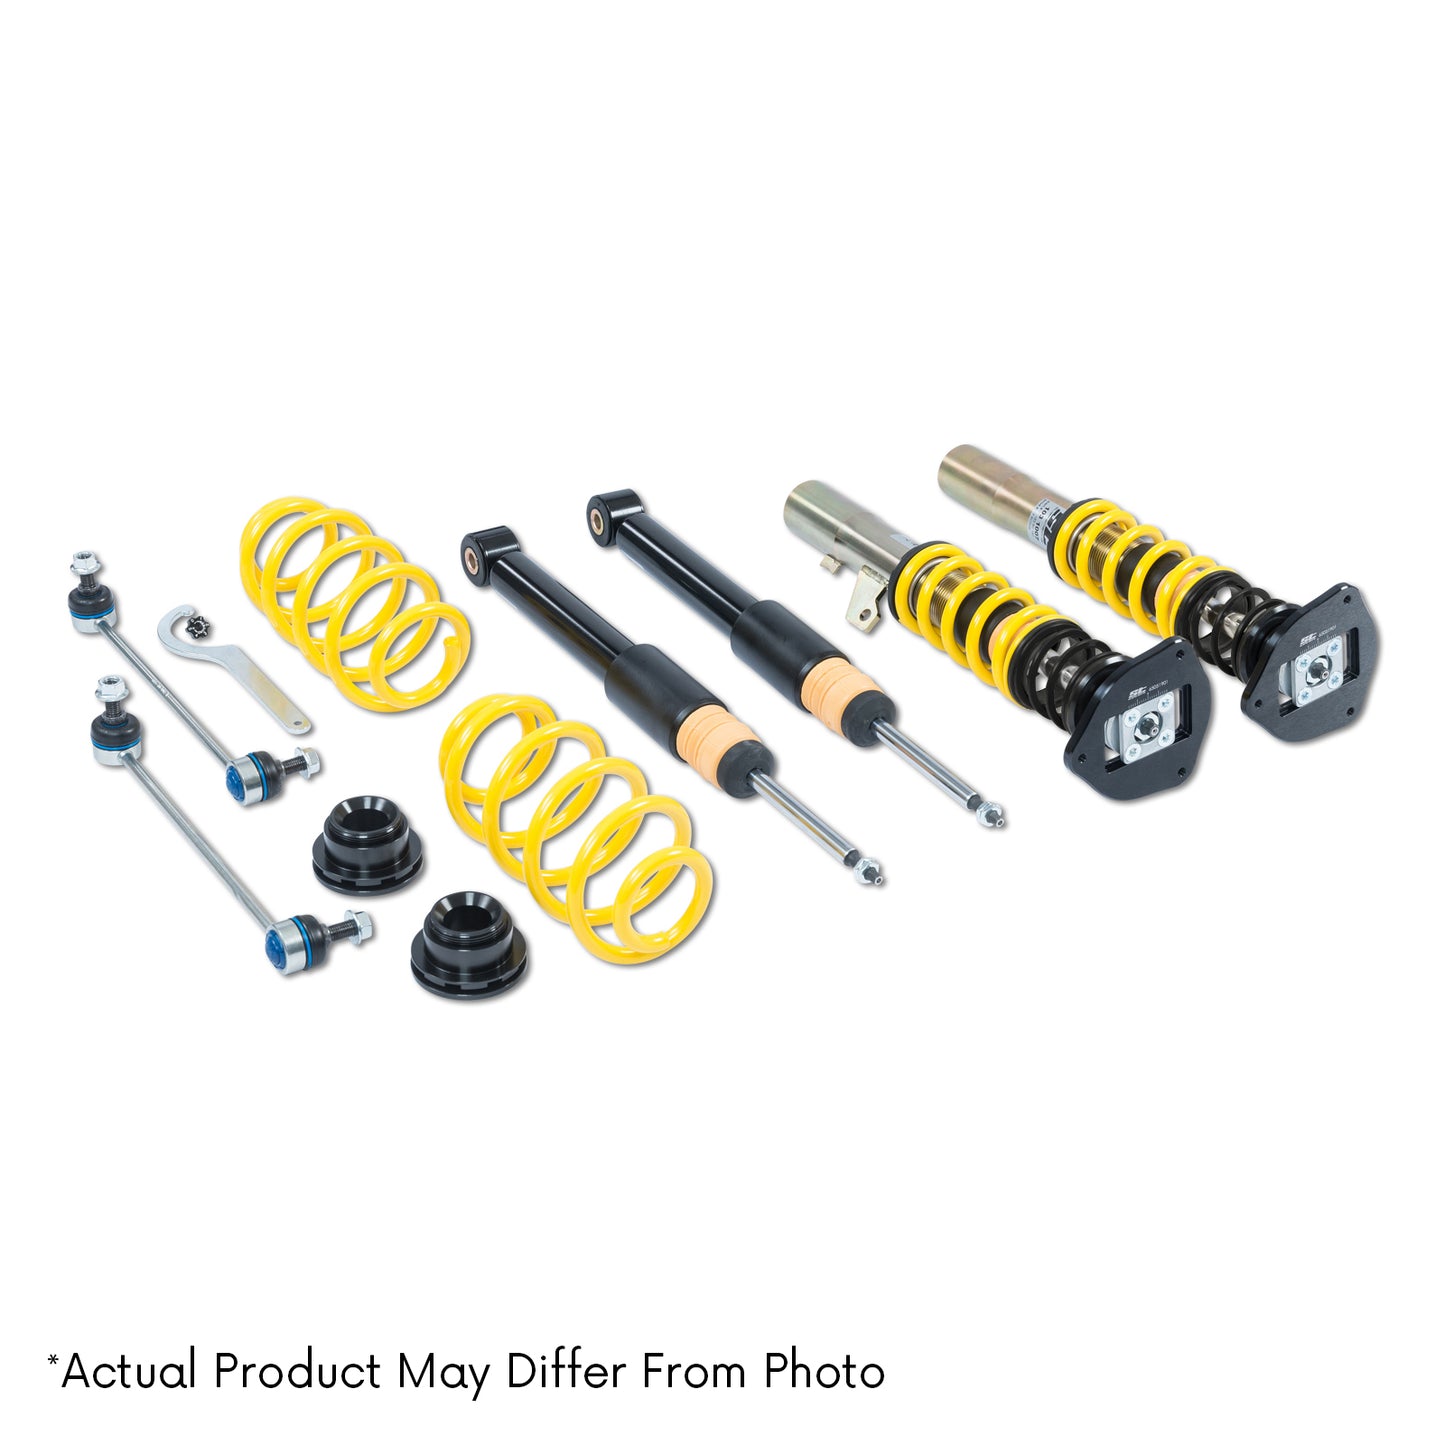 ST Suspensions 18220813 ST XTA Coilover Kit - 95-99 BMW E36 Compact